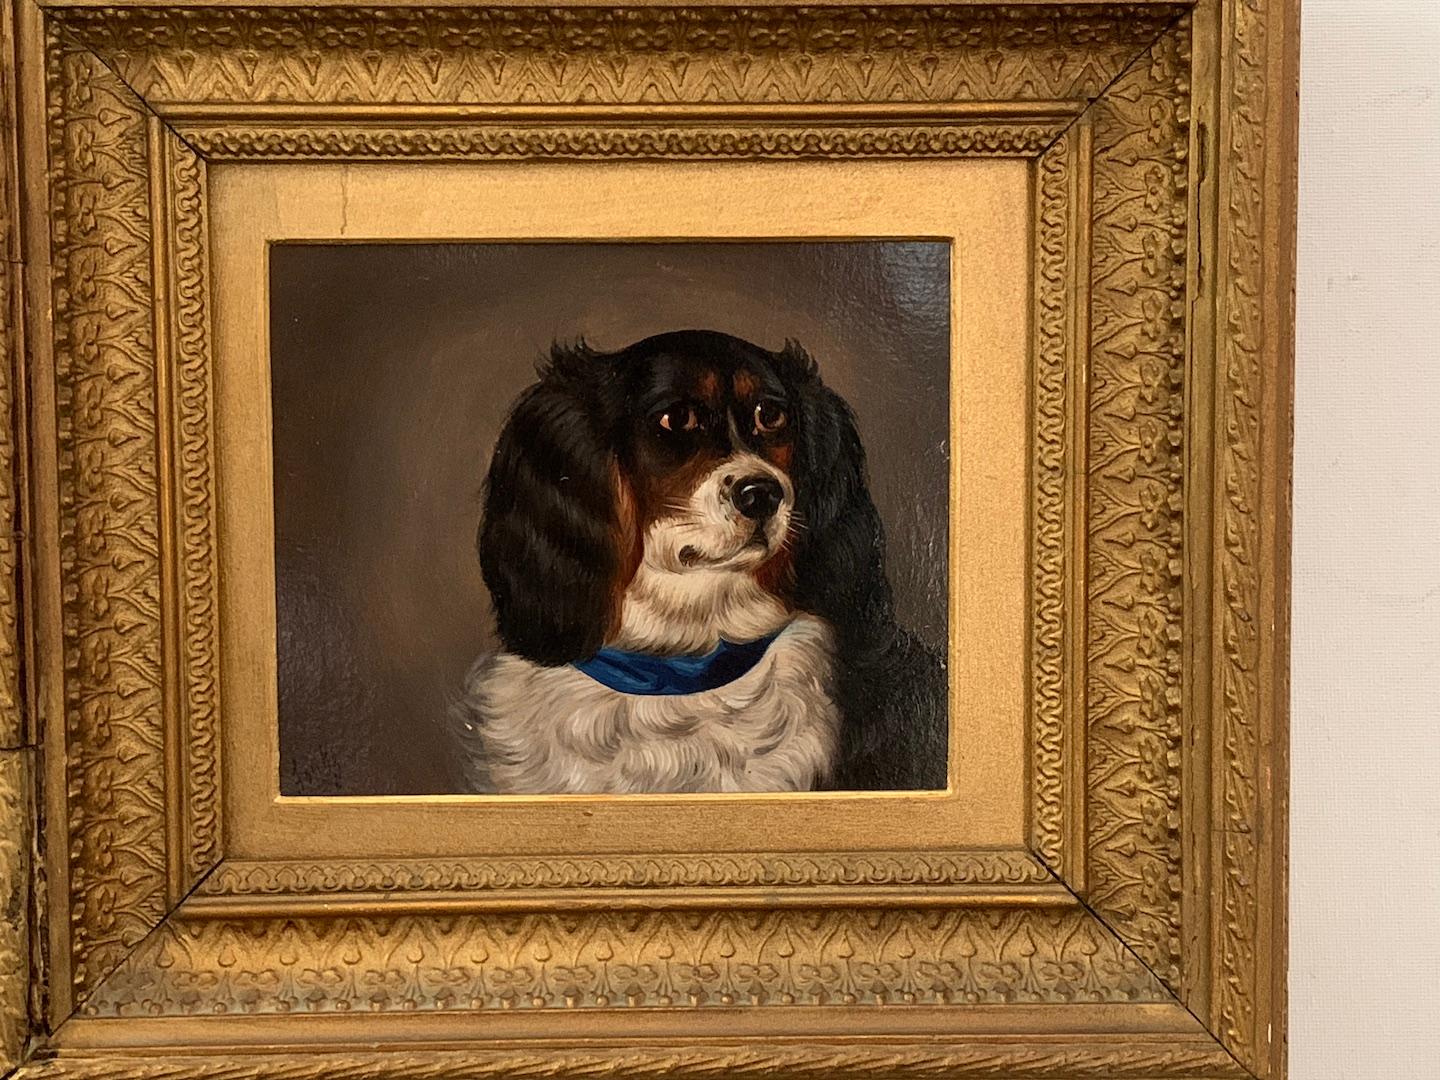 19th century English Antique Portrait of a King Charles Cavalier dog spaniel - Painting by Edwin Loder